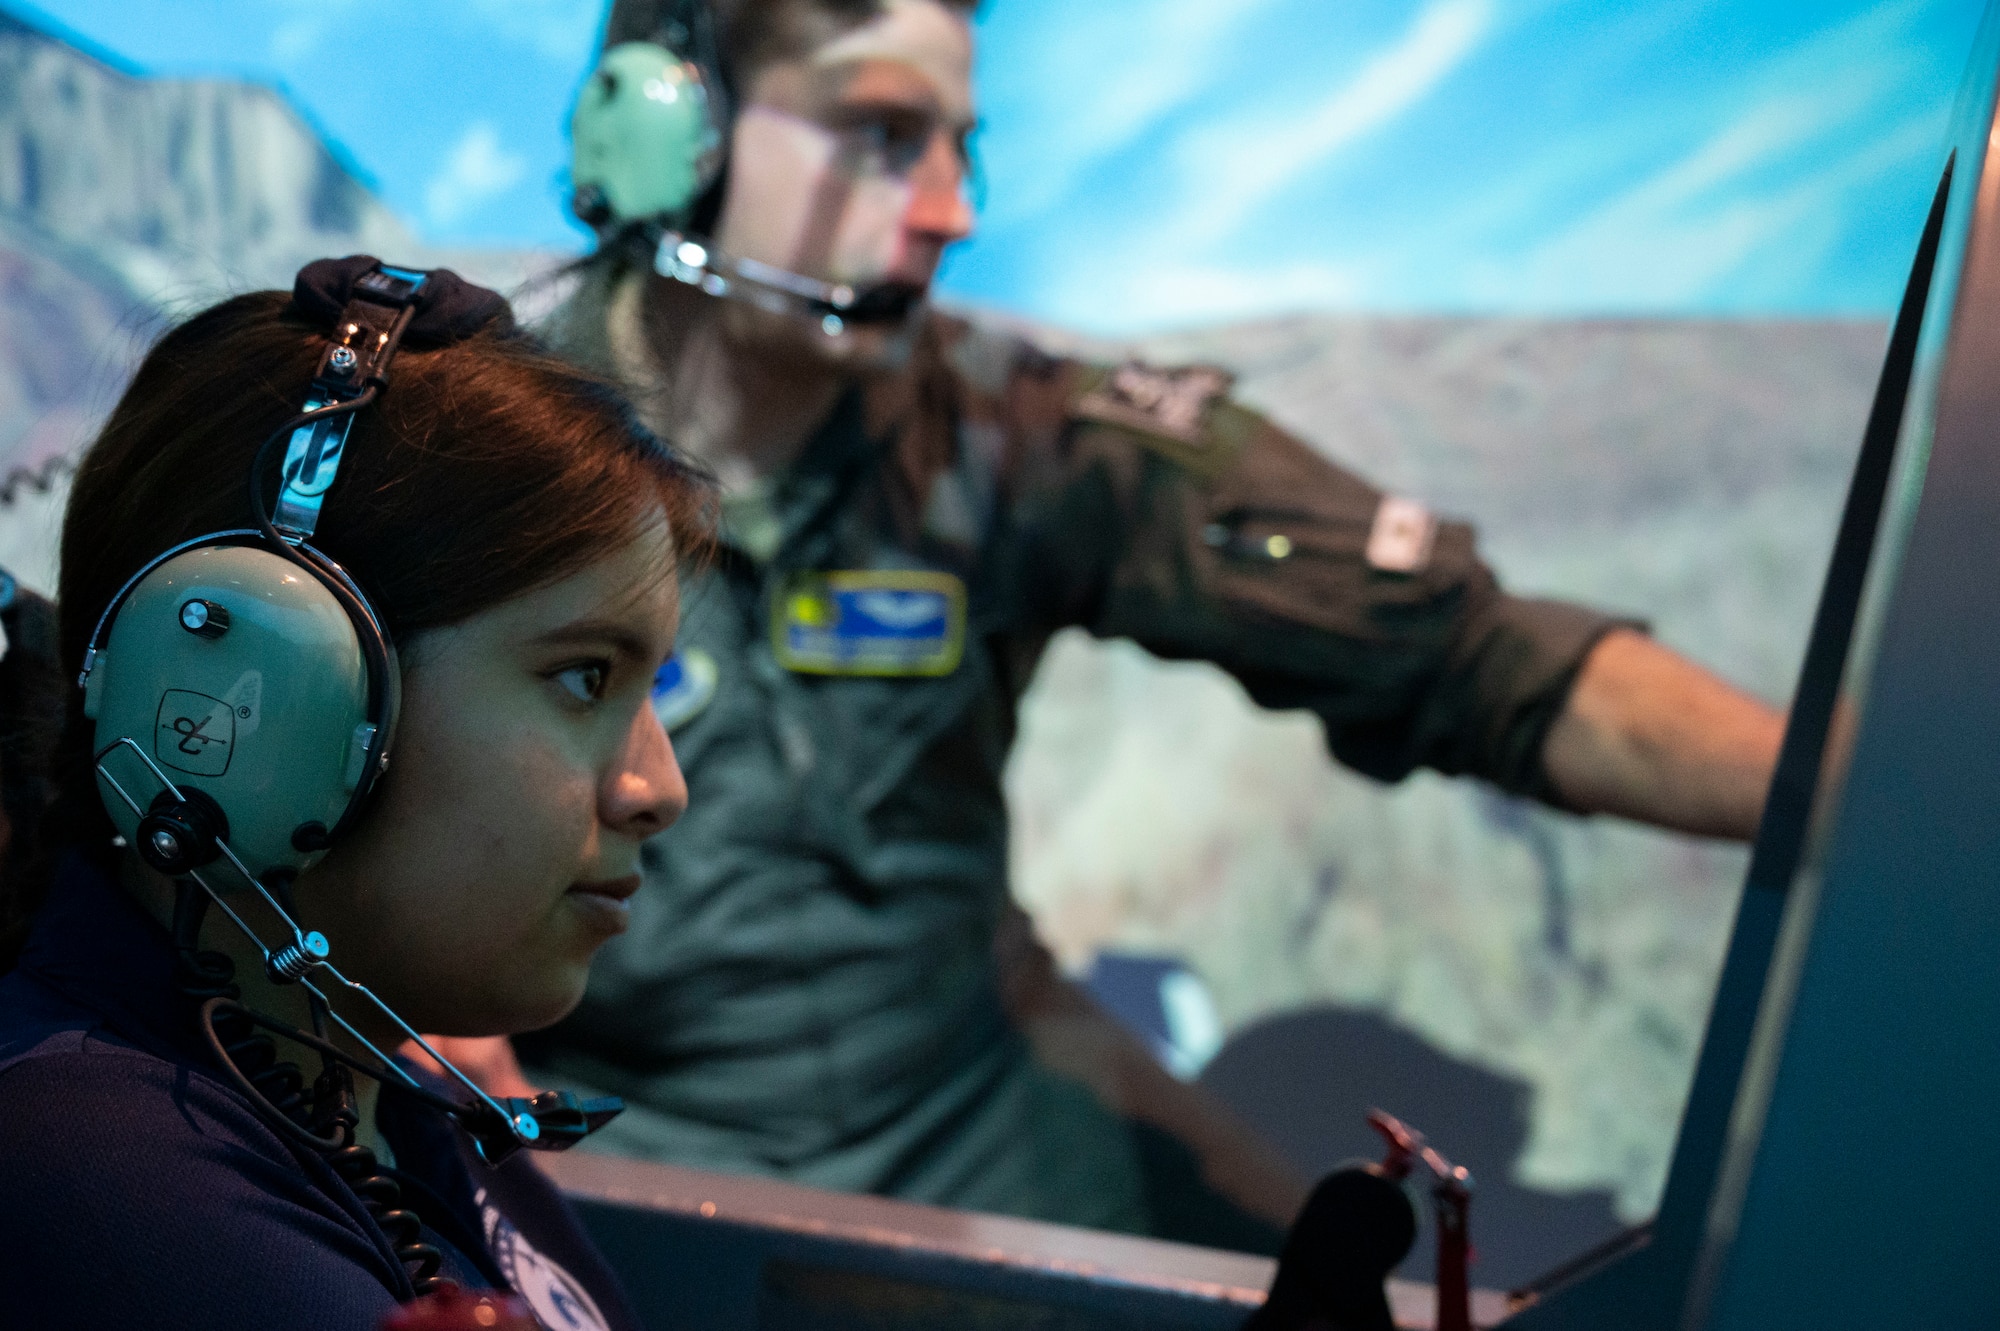 Carla Robles (front), Del Rio High School Junior Reserve Officer’s Training Corps cadet, is lead by U.S. Air Force Capt. John Champagne (behind), 85th Flying Training Squadron flight simulator instructor, through a T-6A Texan II flight simulator at Laughlin Air Force Base, Texas, June 7, 2023. Under the guidance of Col. Kevin Davidson, 47th Flying Training Wing commander, Robles visited Laughlin to learn the valuable insights into the leadership required to steer Laughlin’s service members towards mission success. (U.S. Air Force photo by Airman 1st Class Kailee Reynolds)